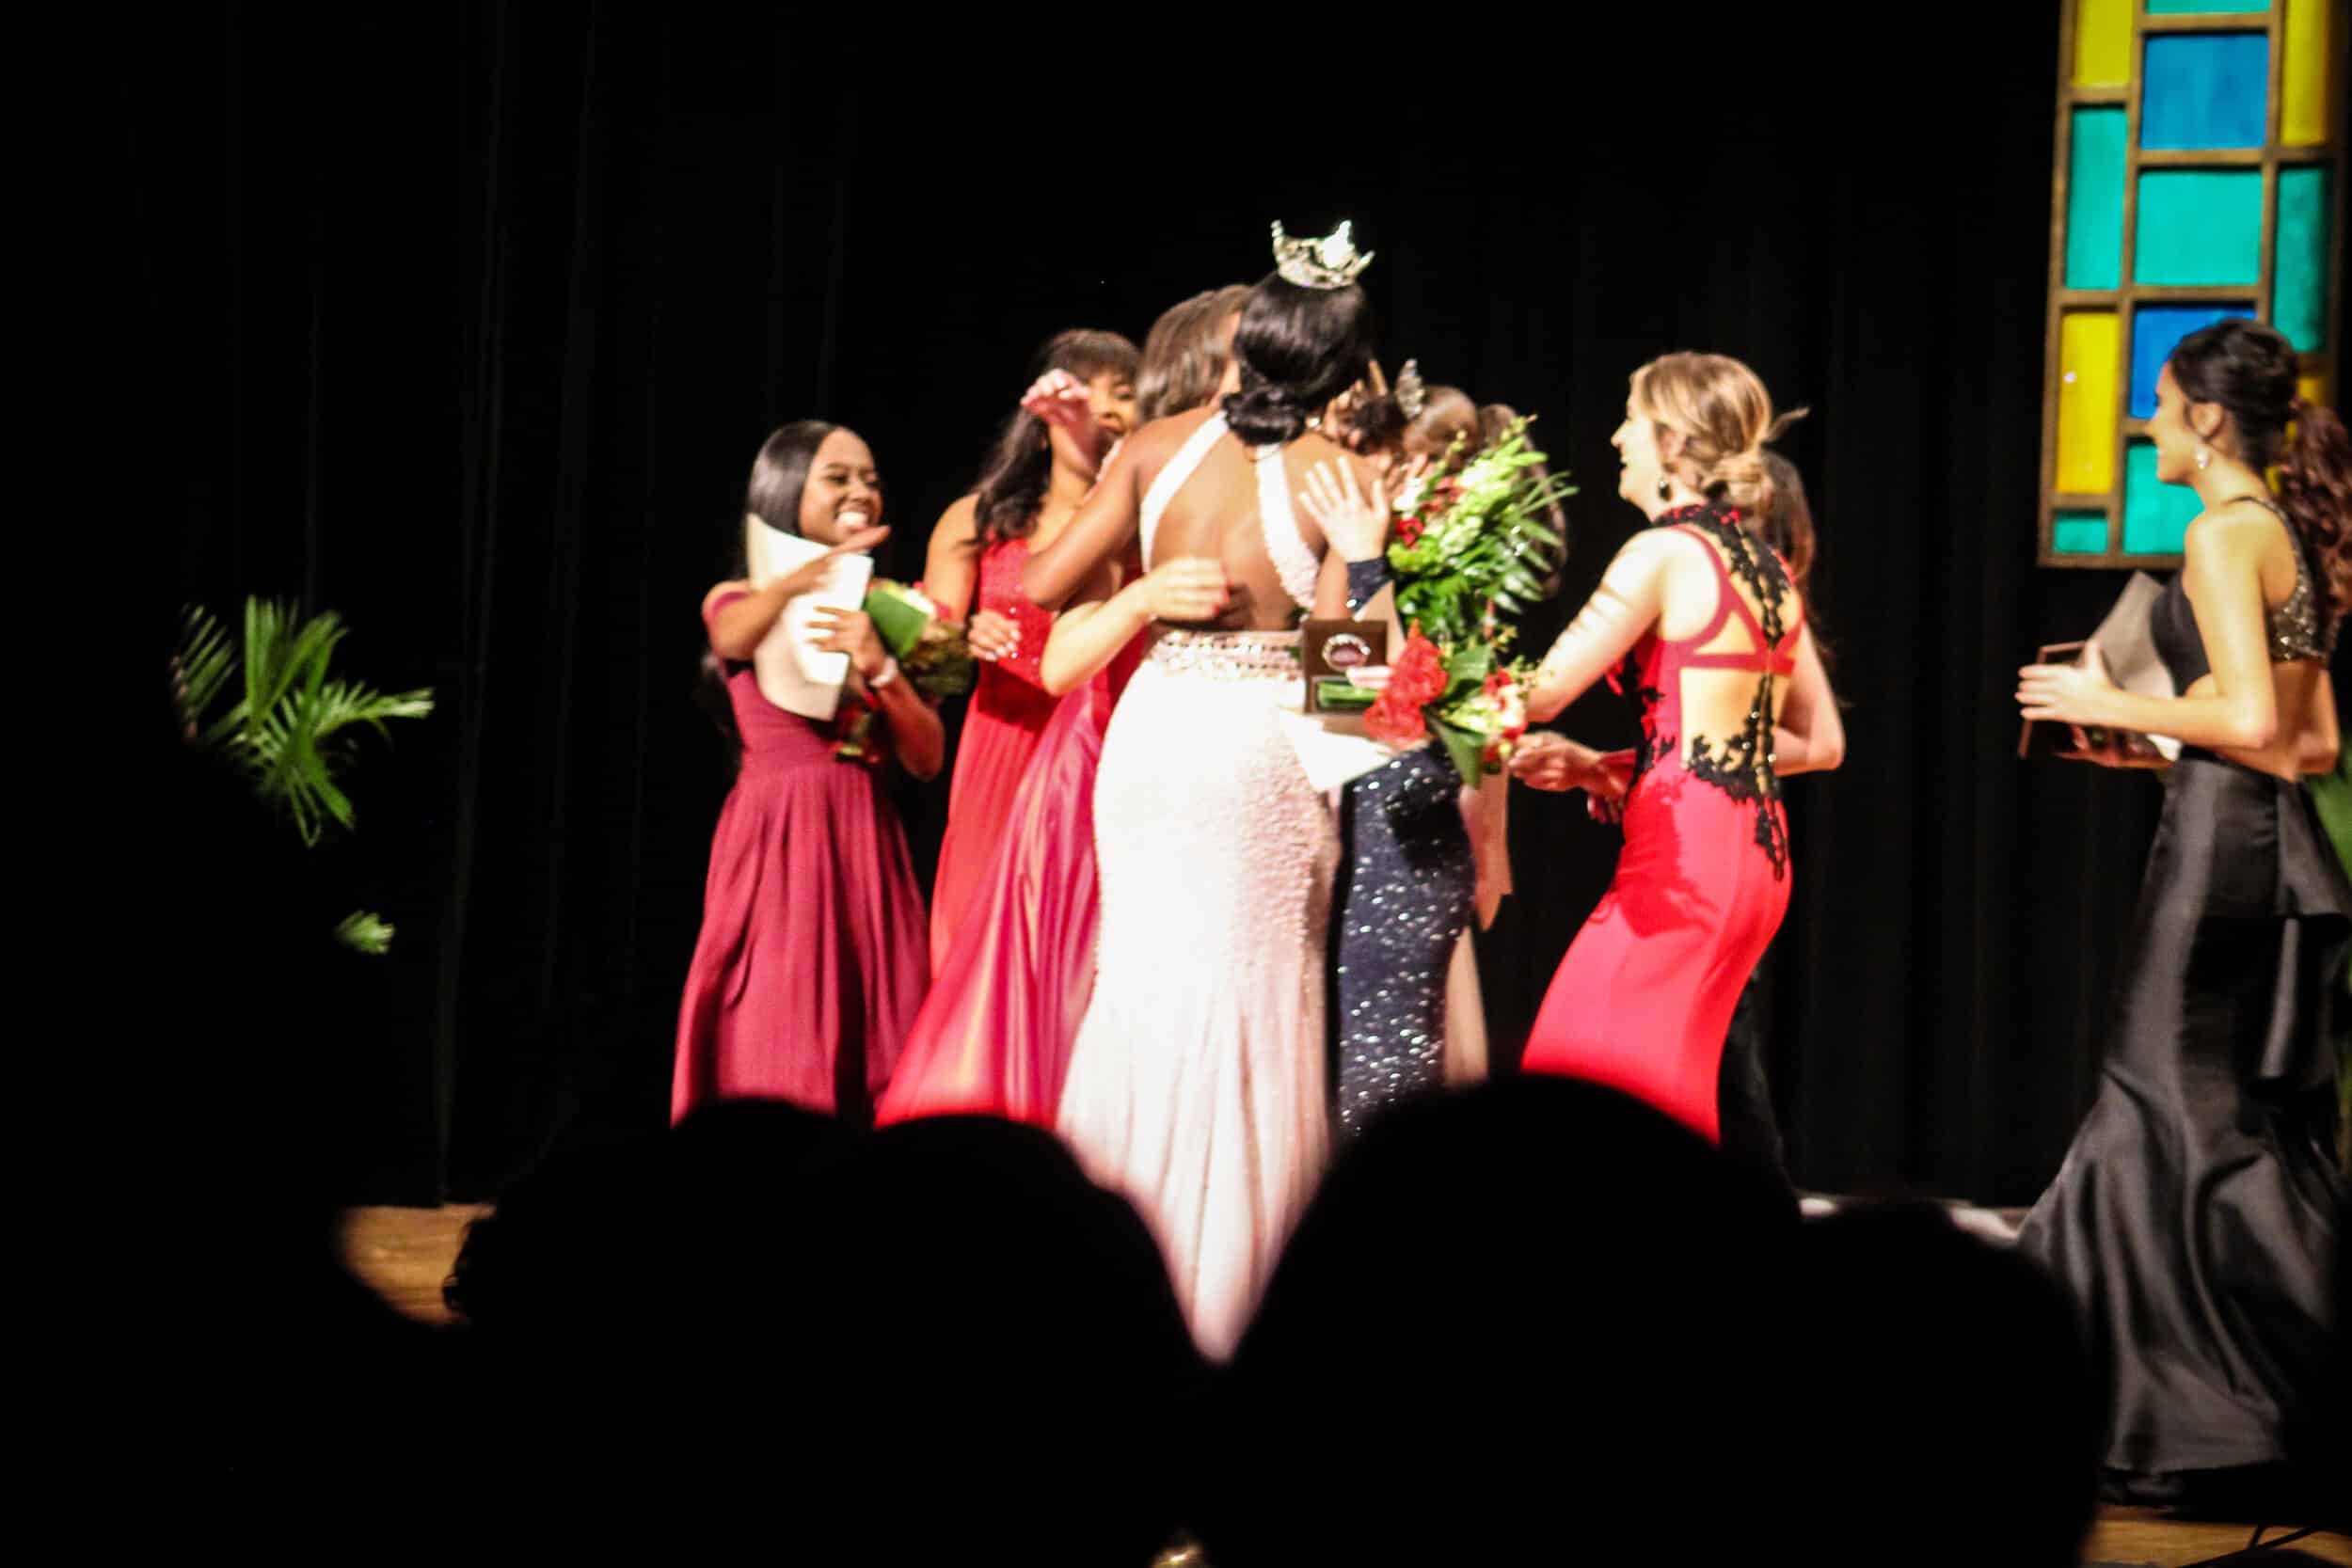 Contestants hugging on stage after Miss NGU is announced.